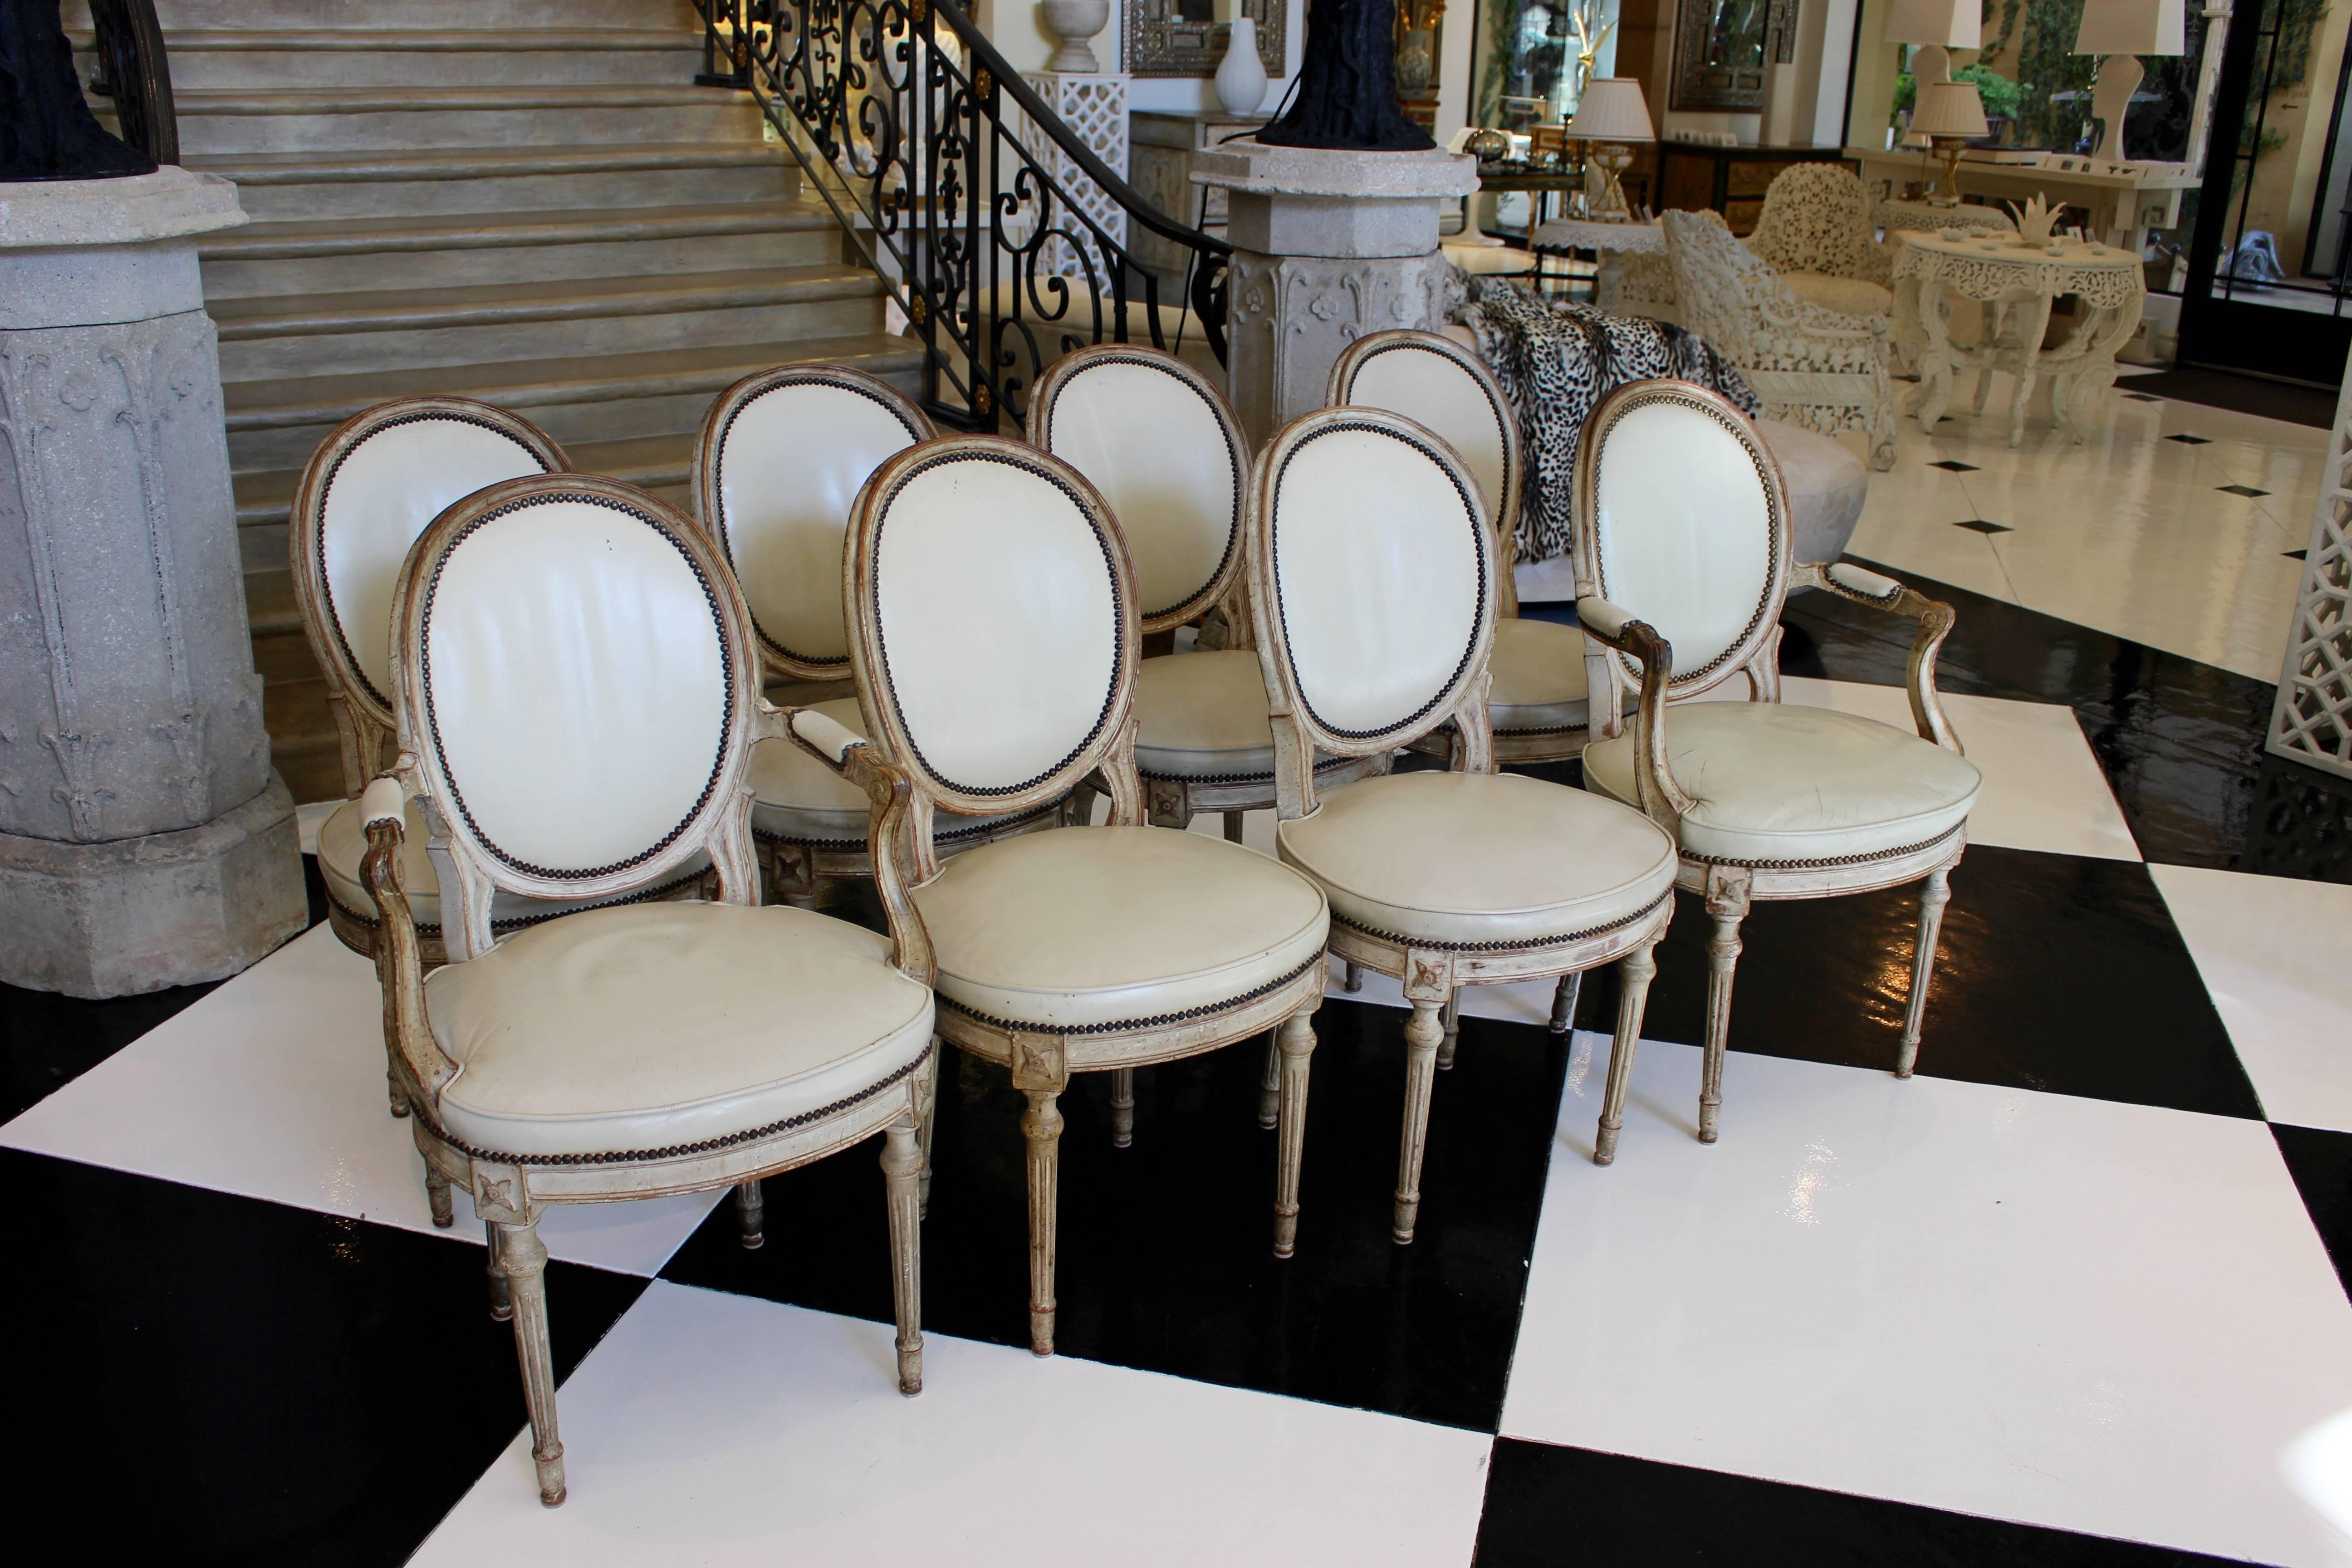 A set of eight French late Louis XVI style cream painted beech wood oval back dining room chairs from the early 19th century, with white leather upholstery. Born during the tumultuous period of the early 19th century after the fall of the Ancien